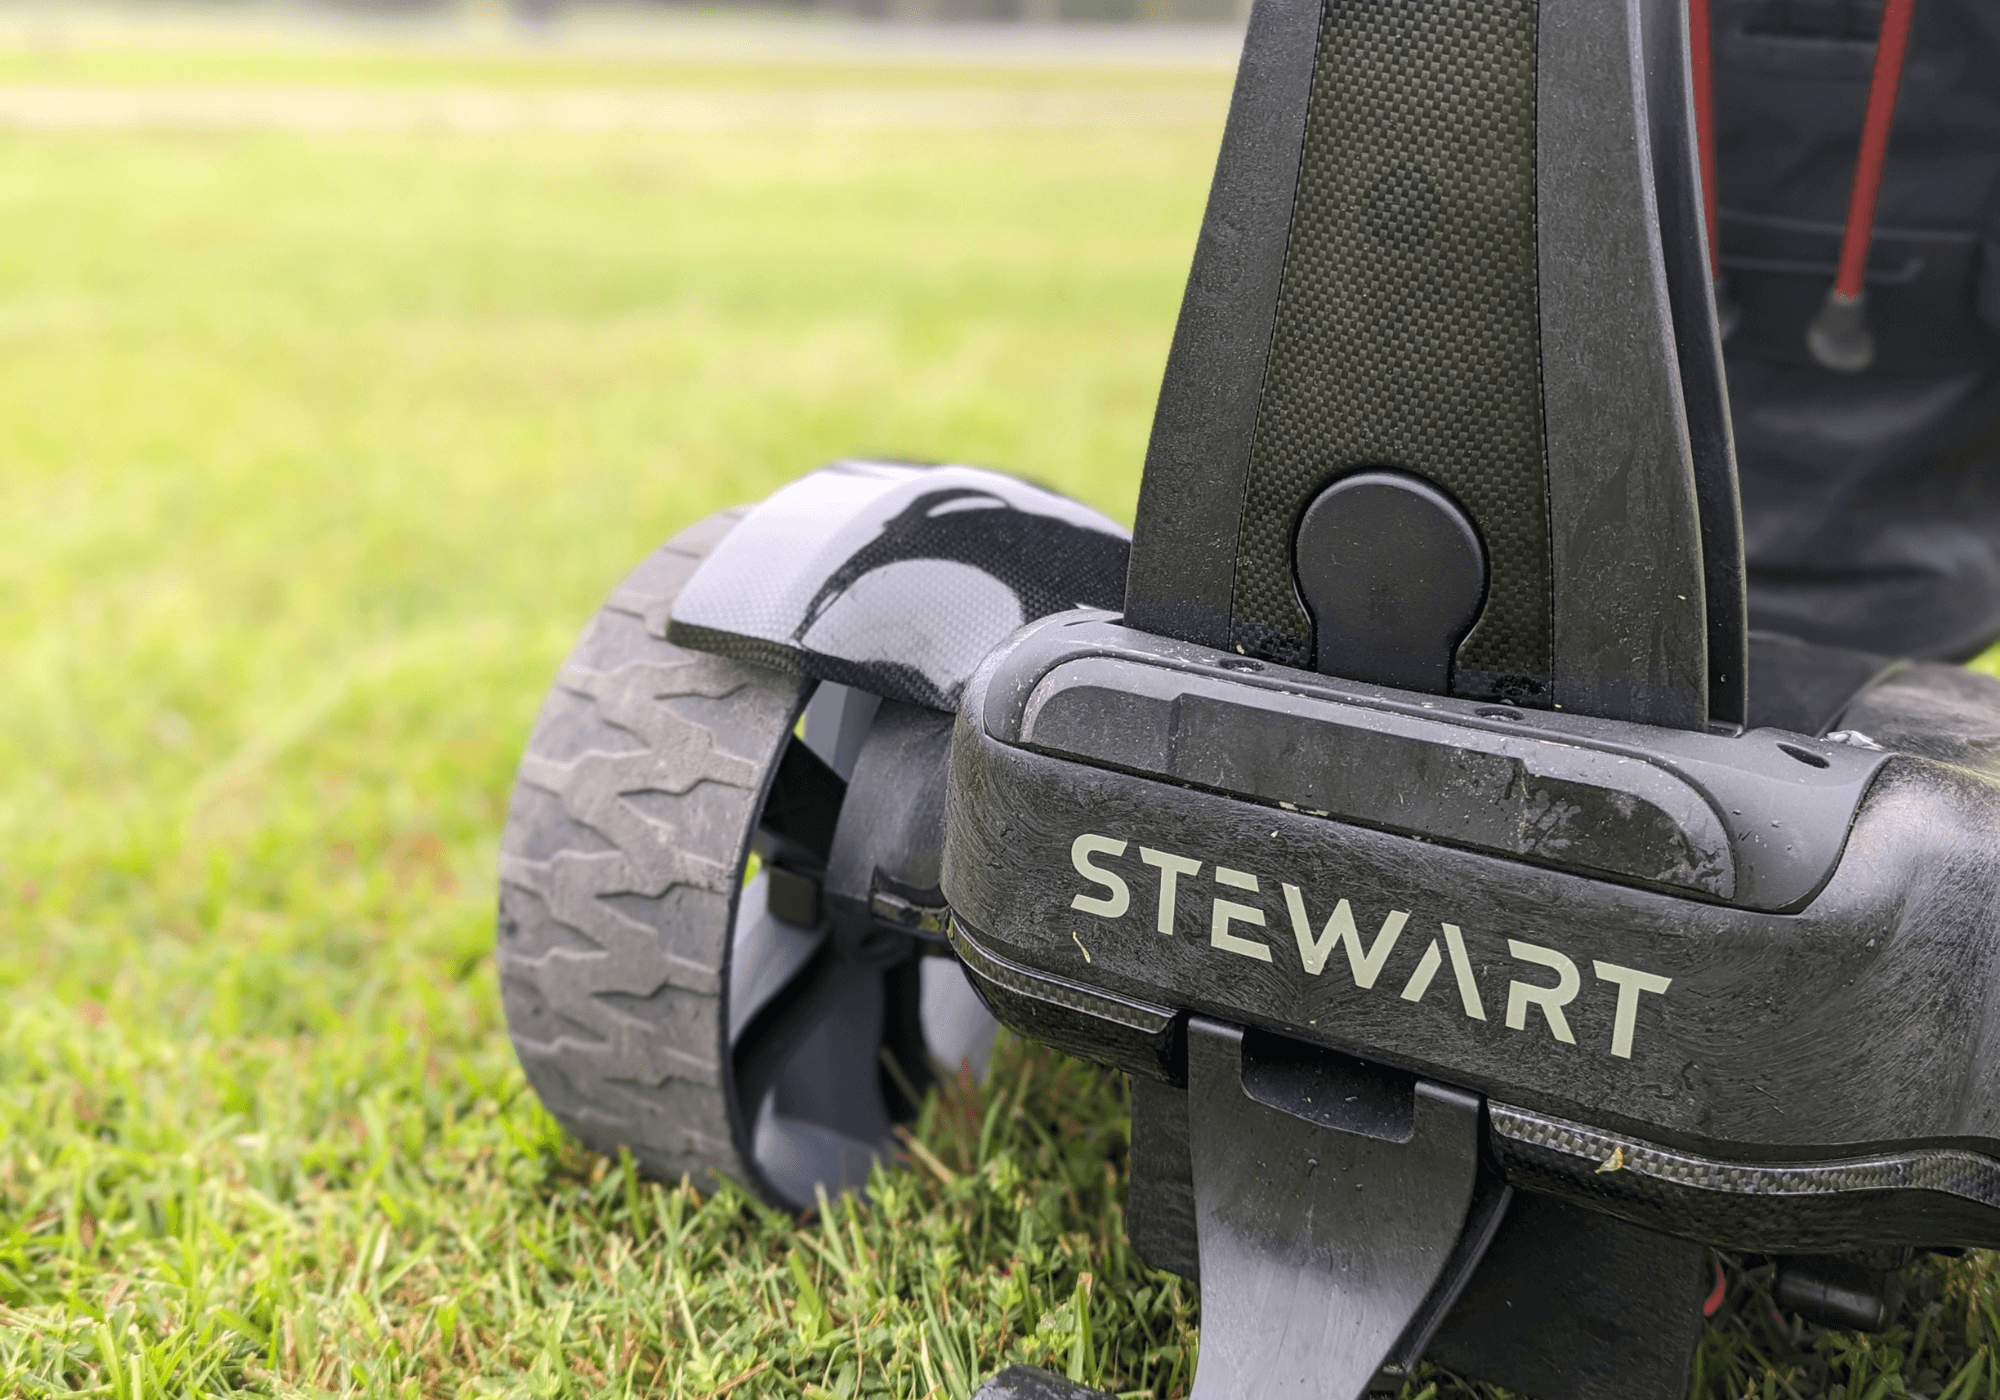 The Stewart VERTX is a solid electric golf push cart. 